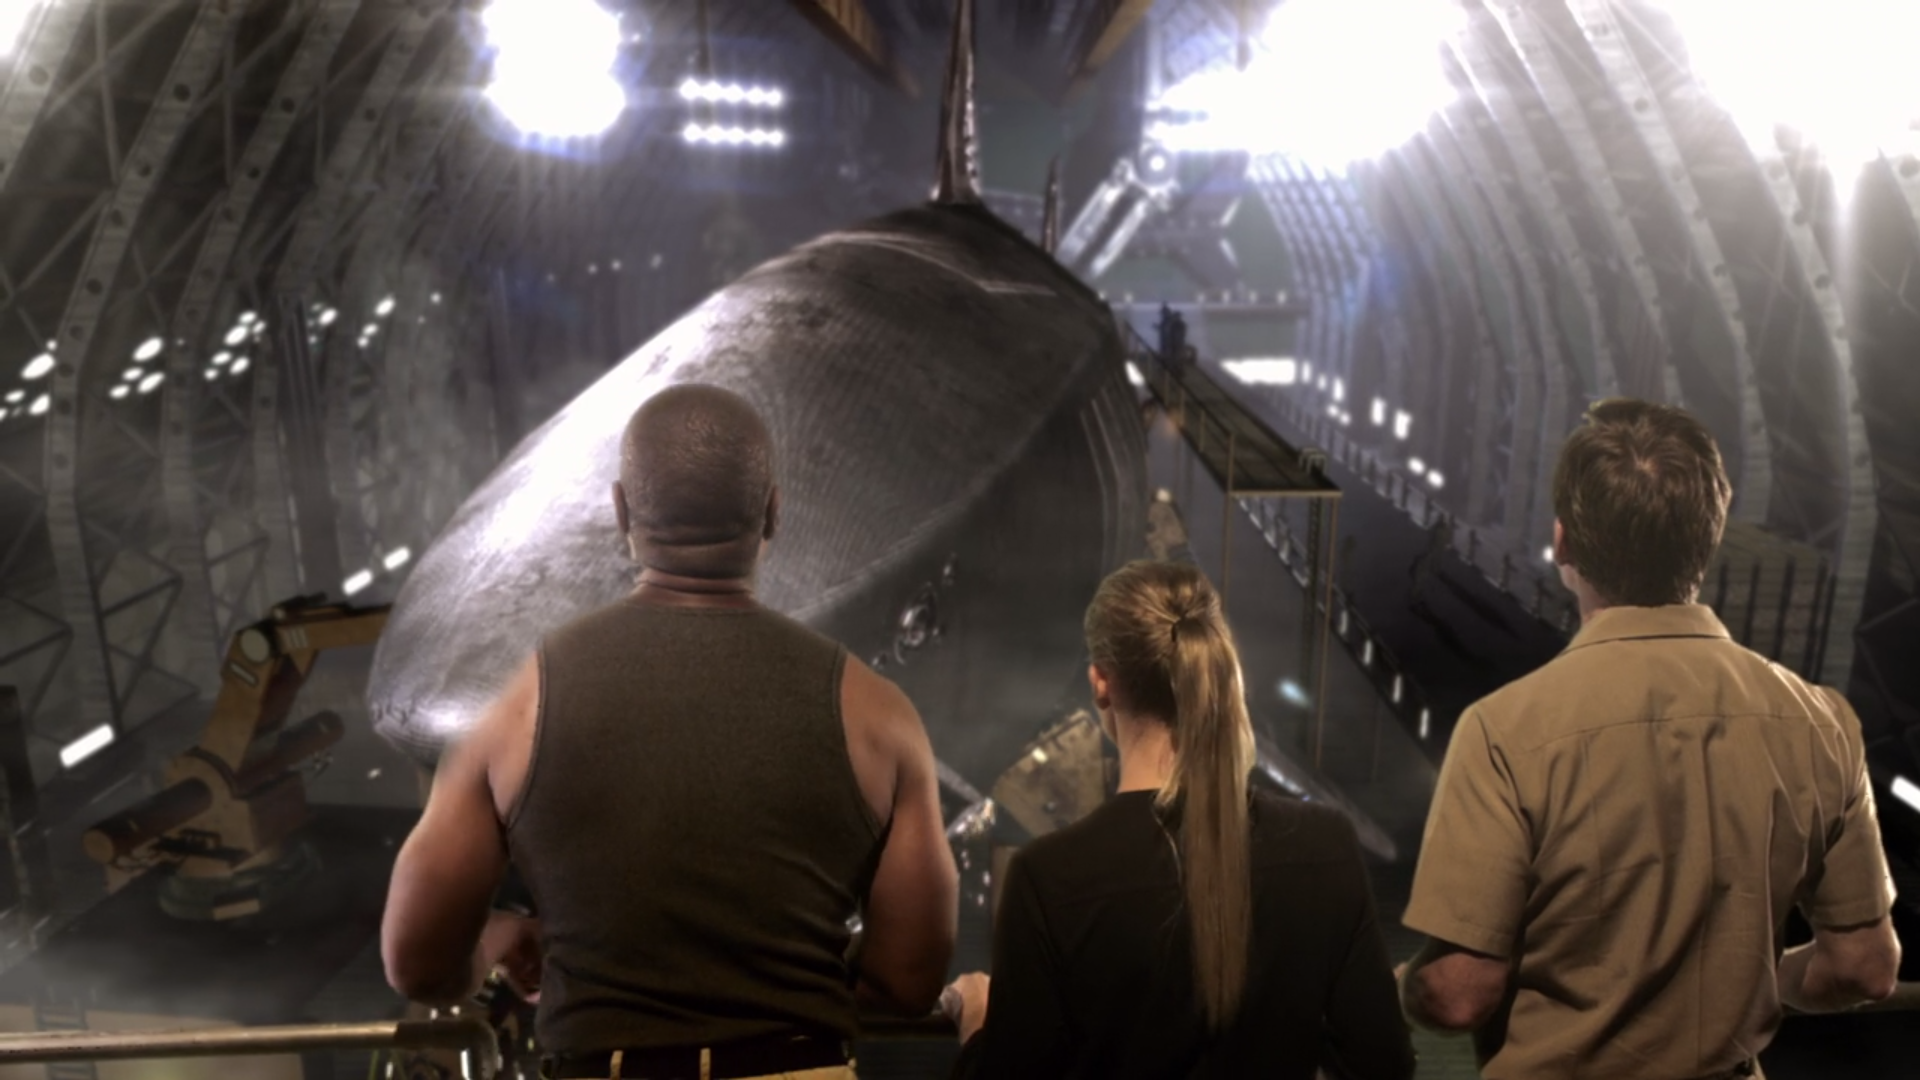 Three people look down at a large metallic shark under construction.